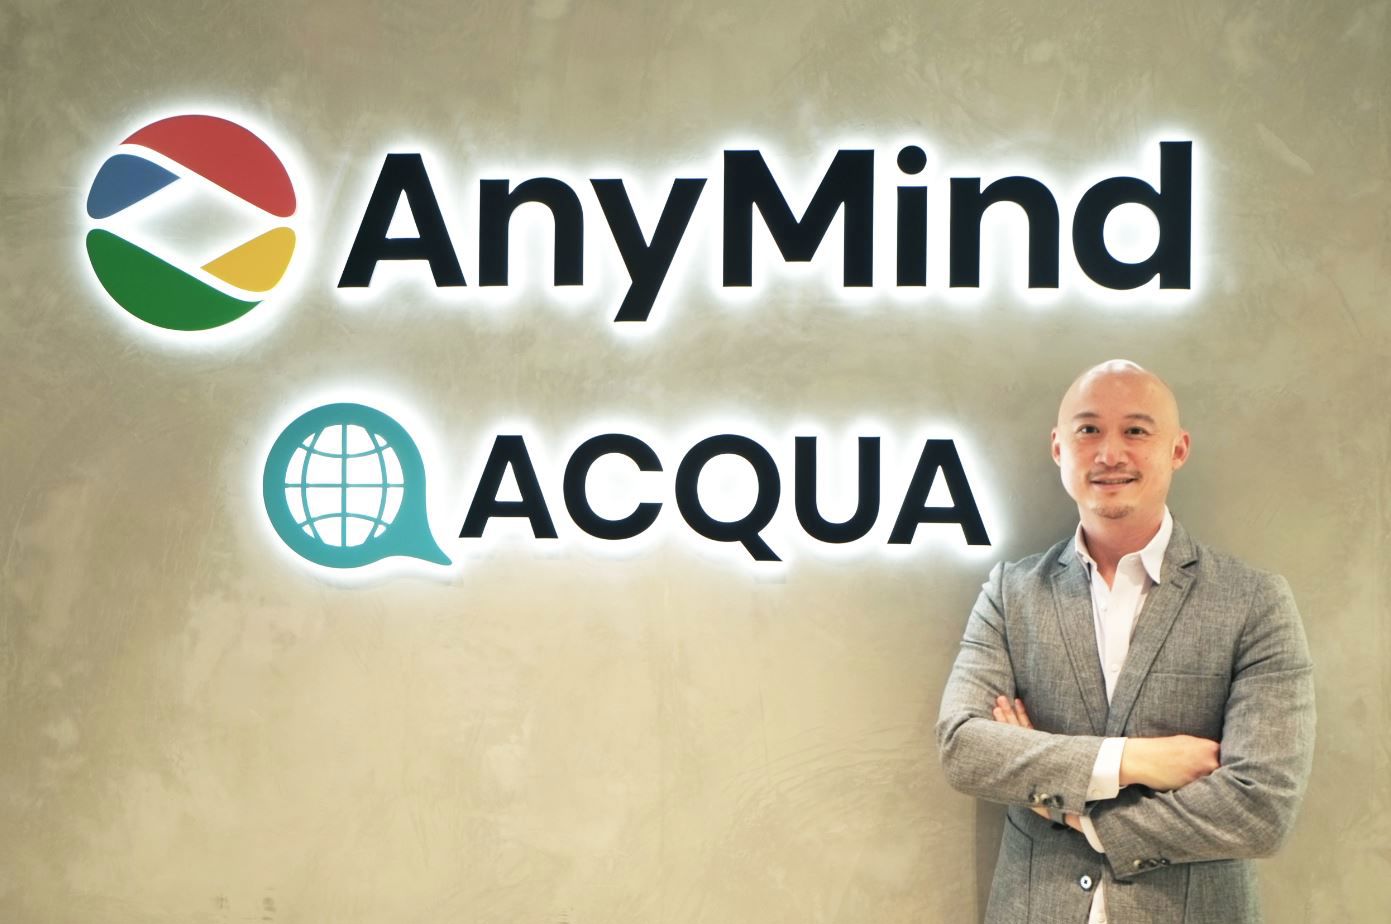 commerce enablement company anymind group looks drive potential growth hong kong